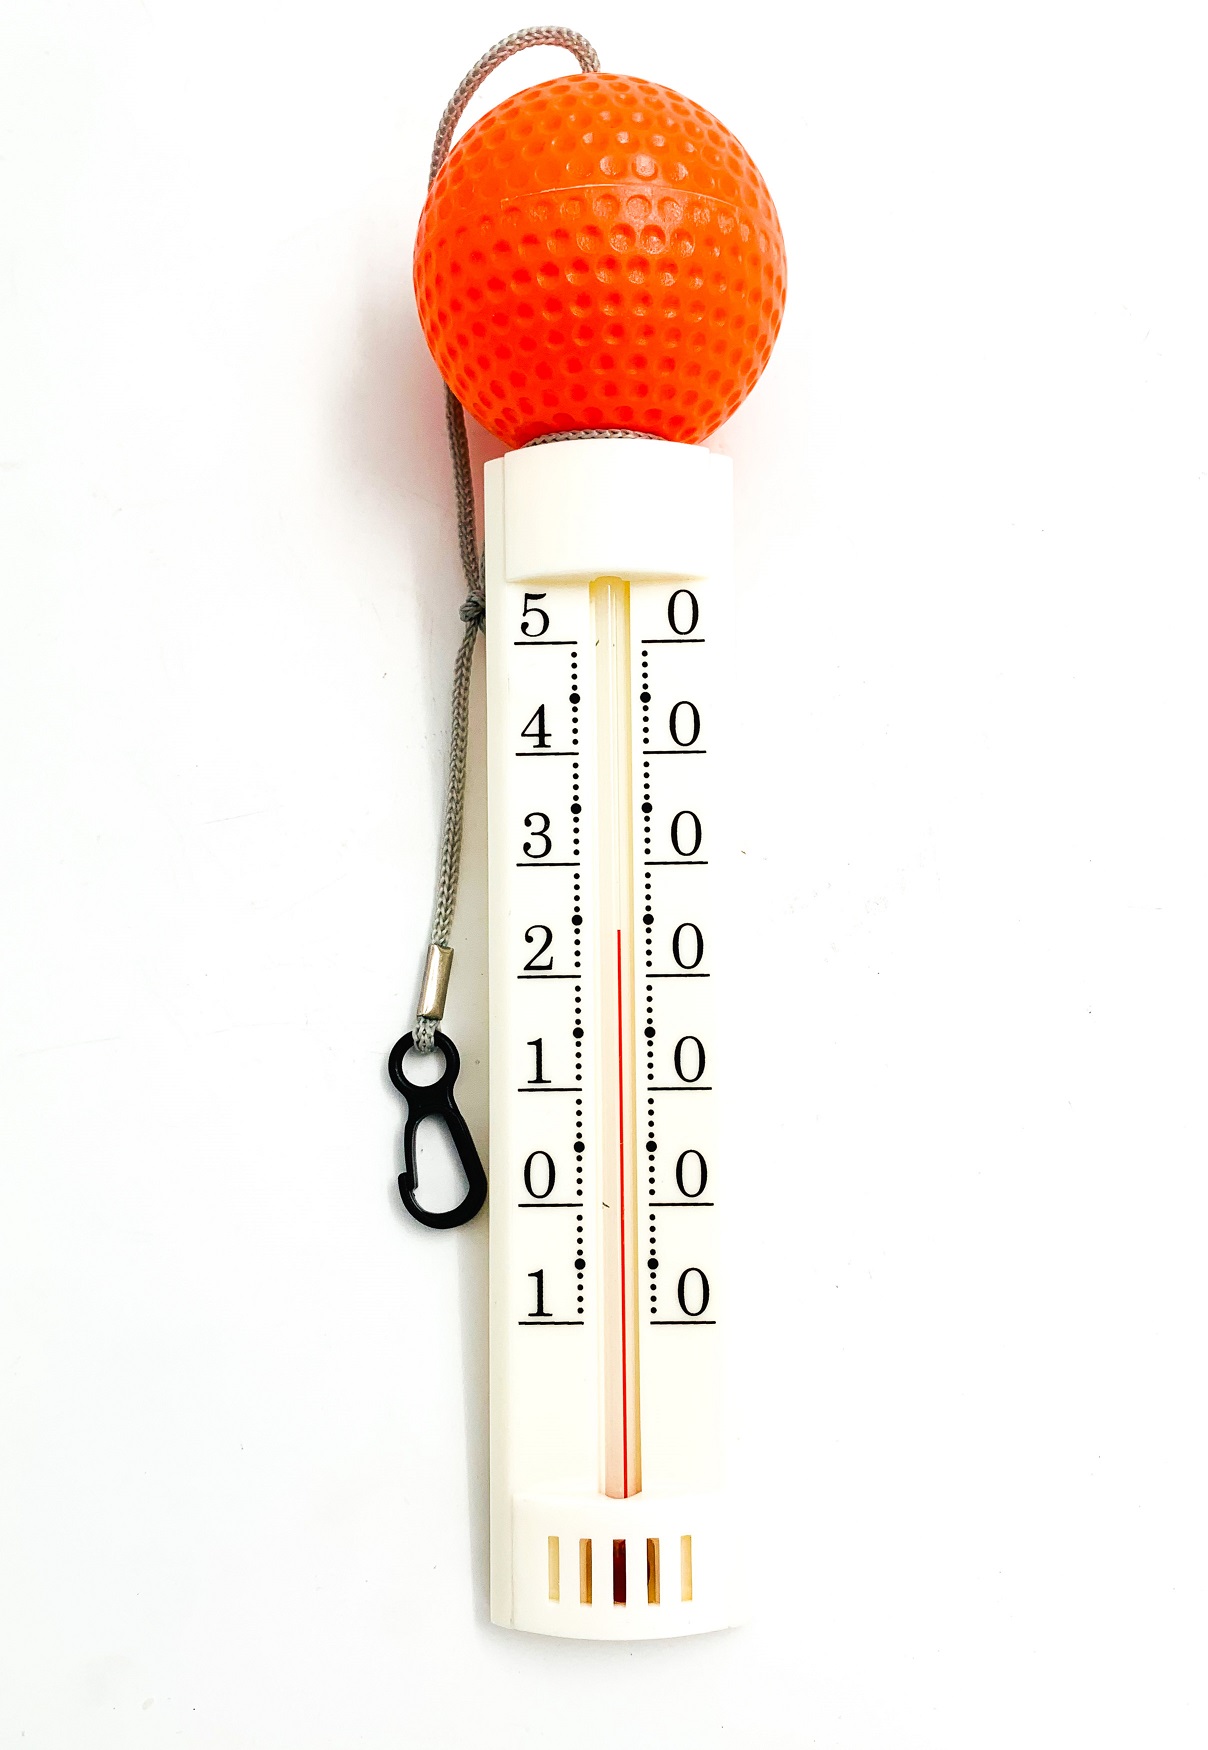 AS-182003 Schwimm-Thermometer mit Kugel